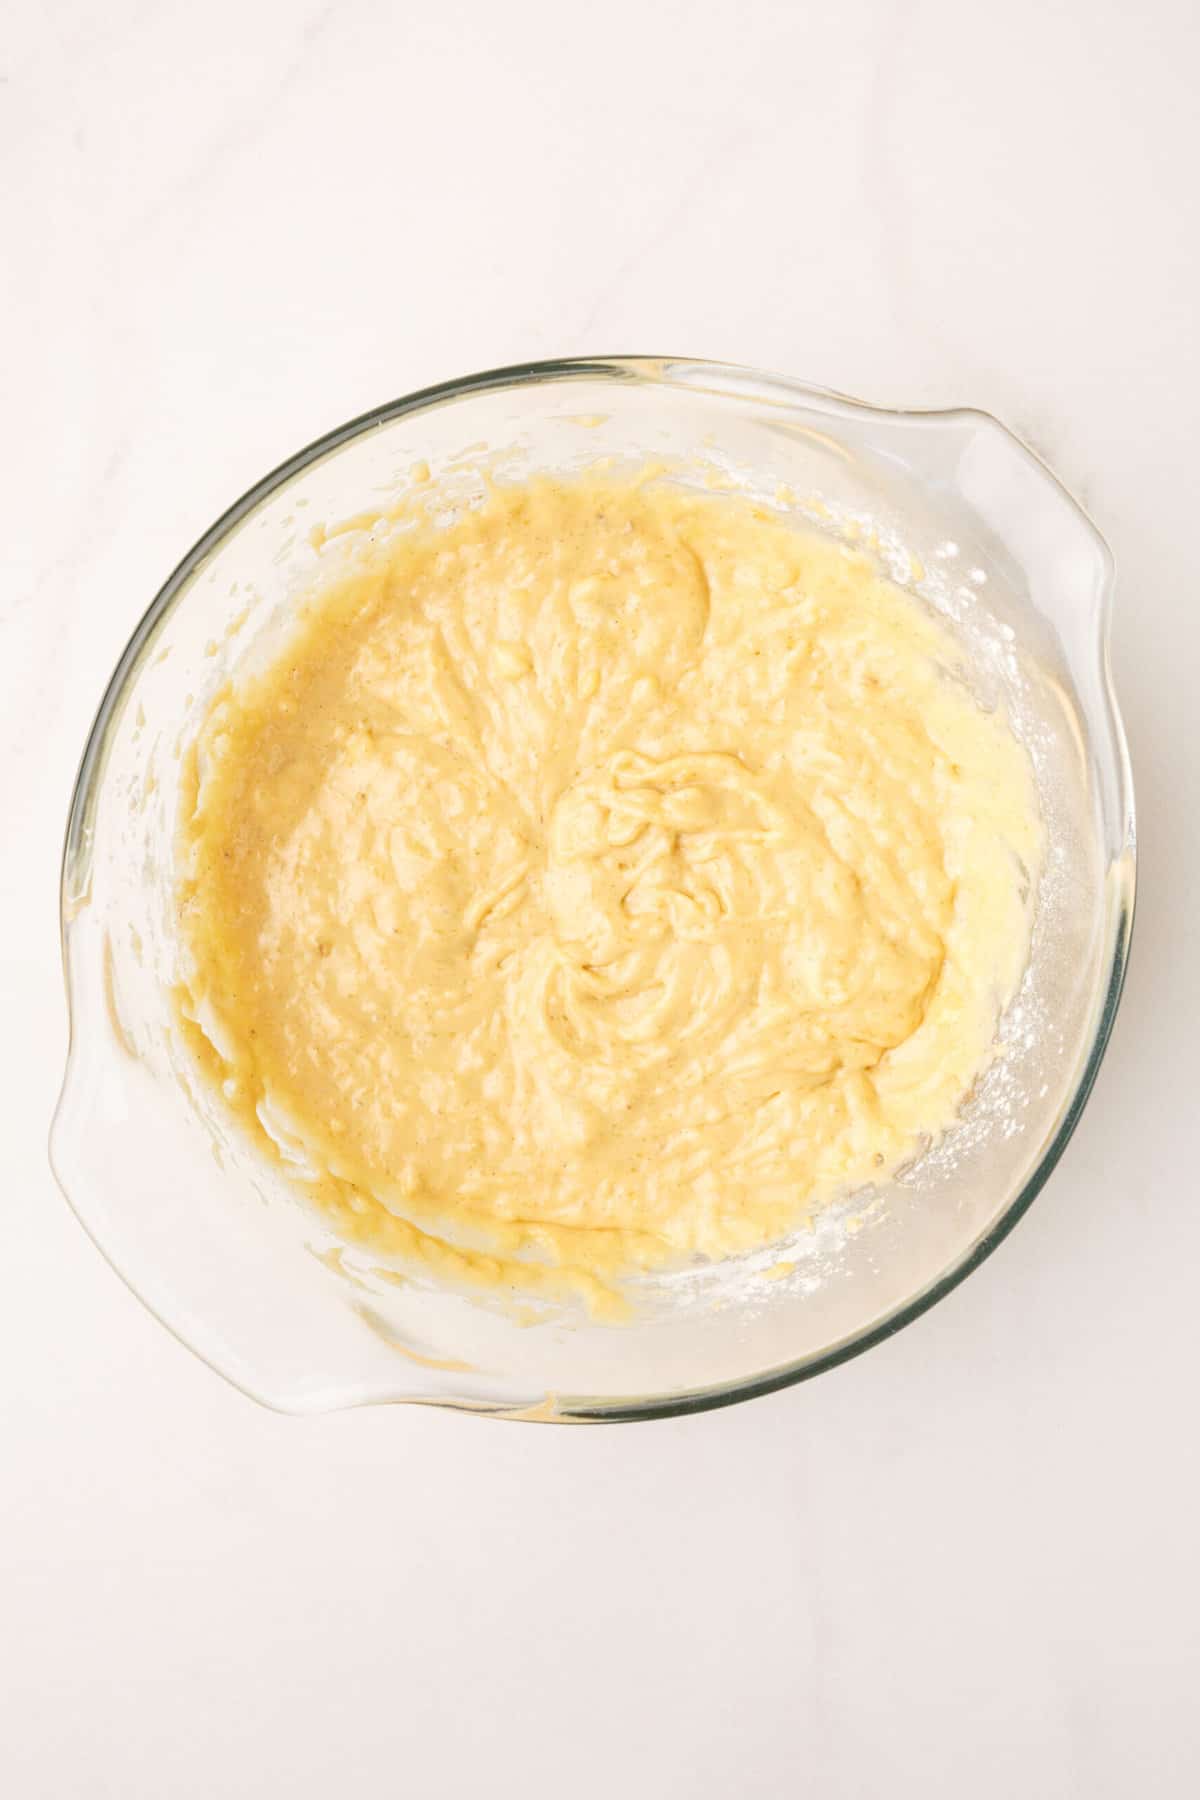 banana bread batter in a large glass bowl